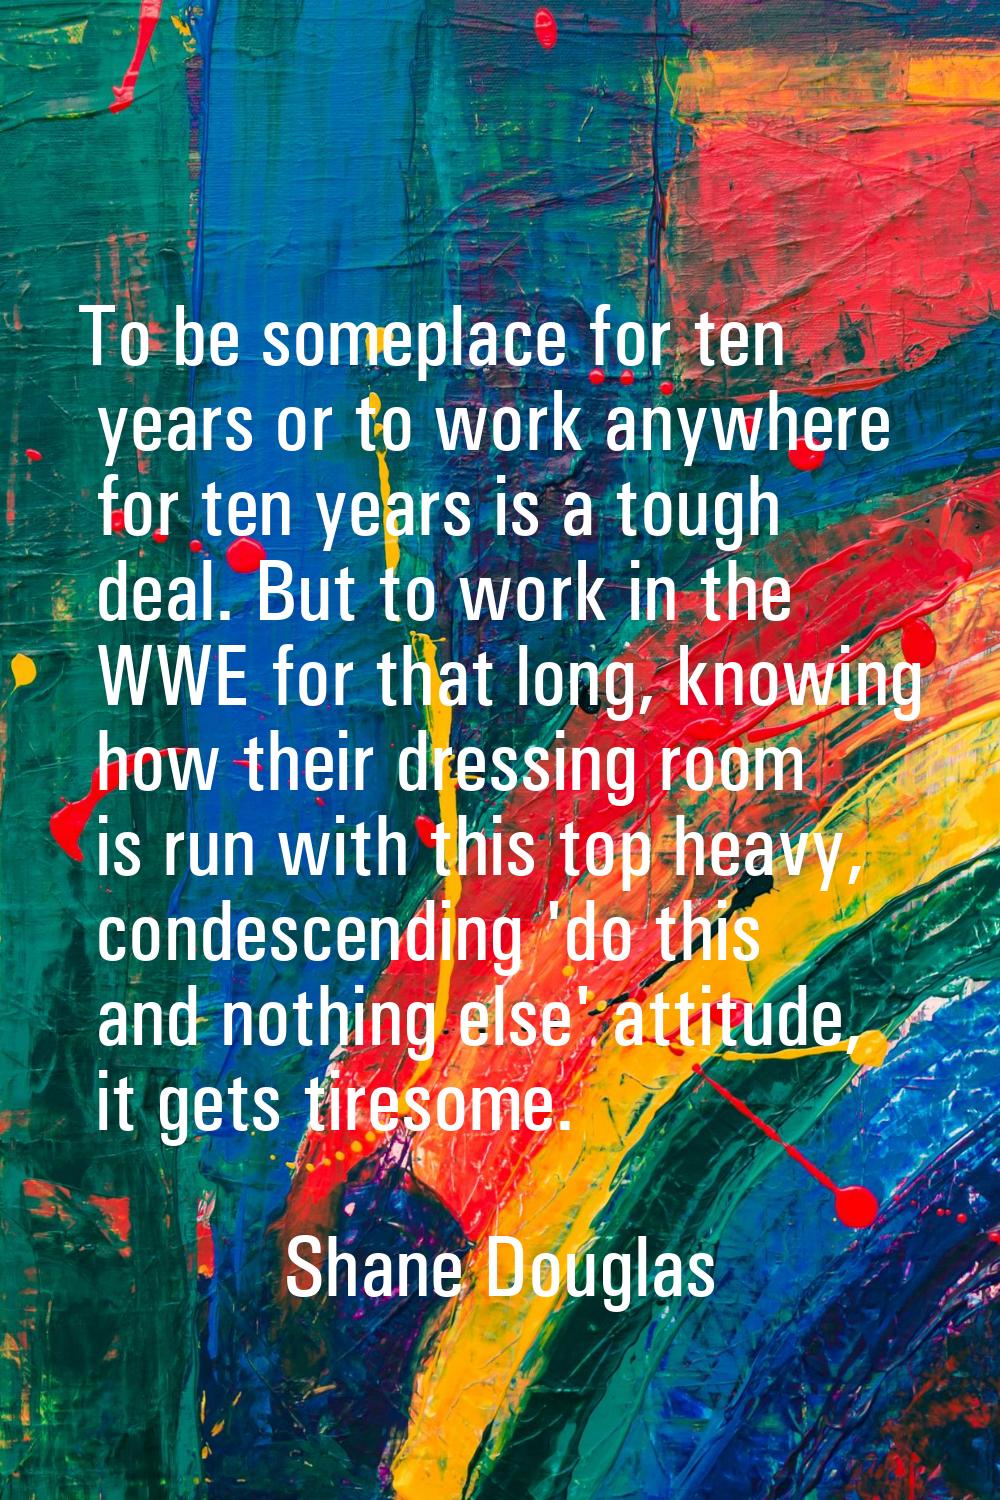 To be someplace for ten years or to work anywhere for ten years is a tough deal. But to work in the